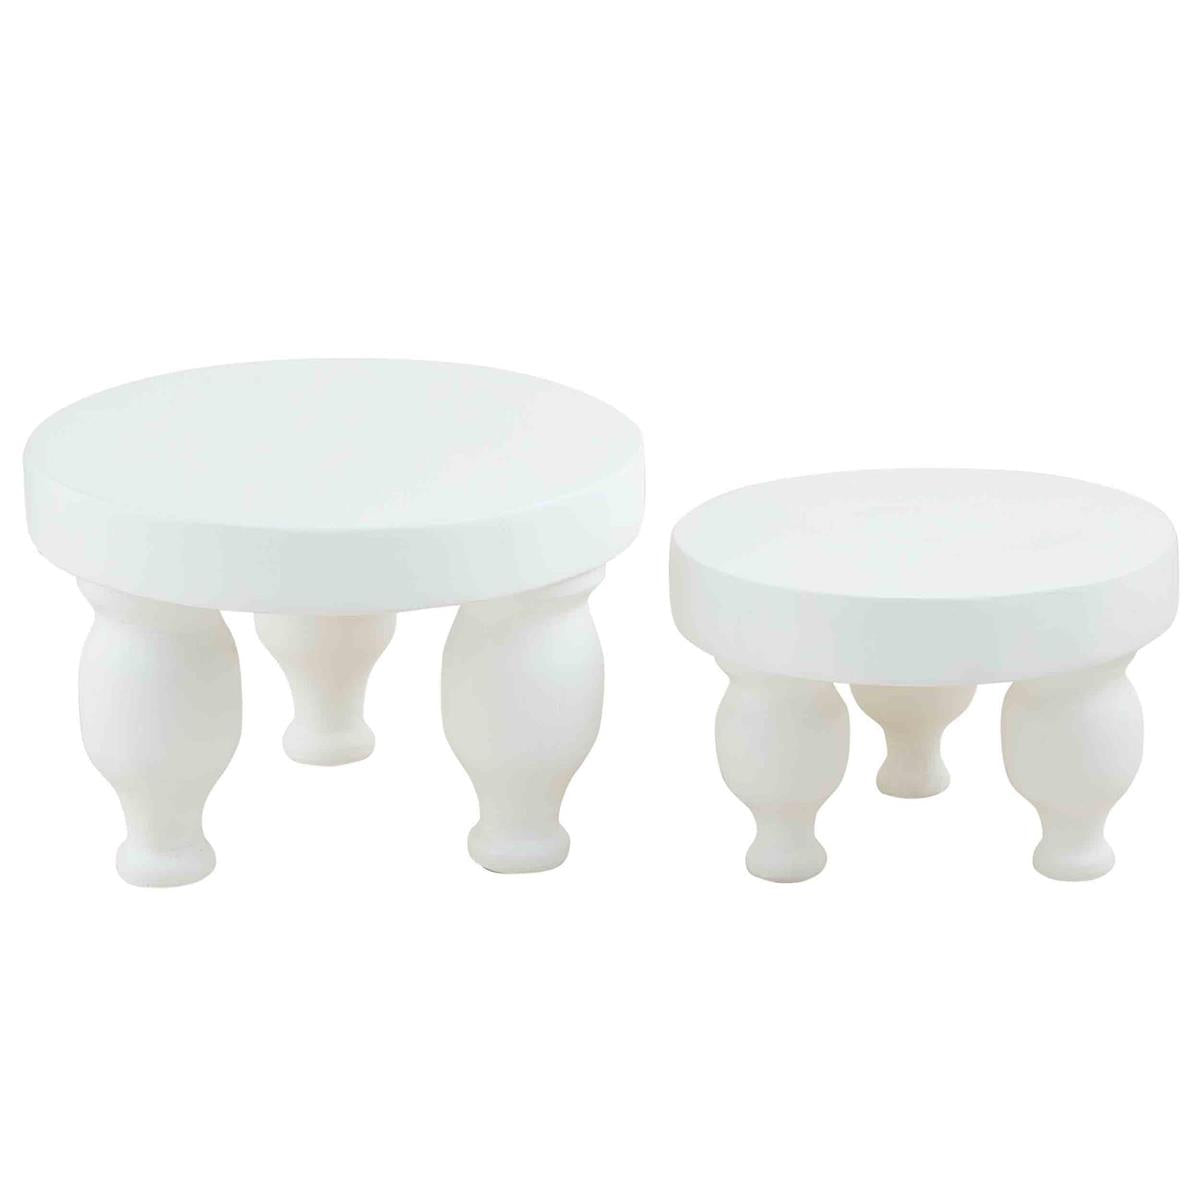 small and large white risers on a white background